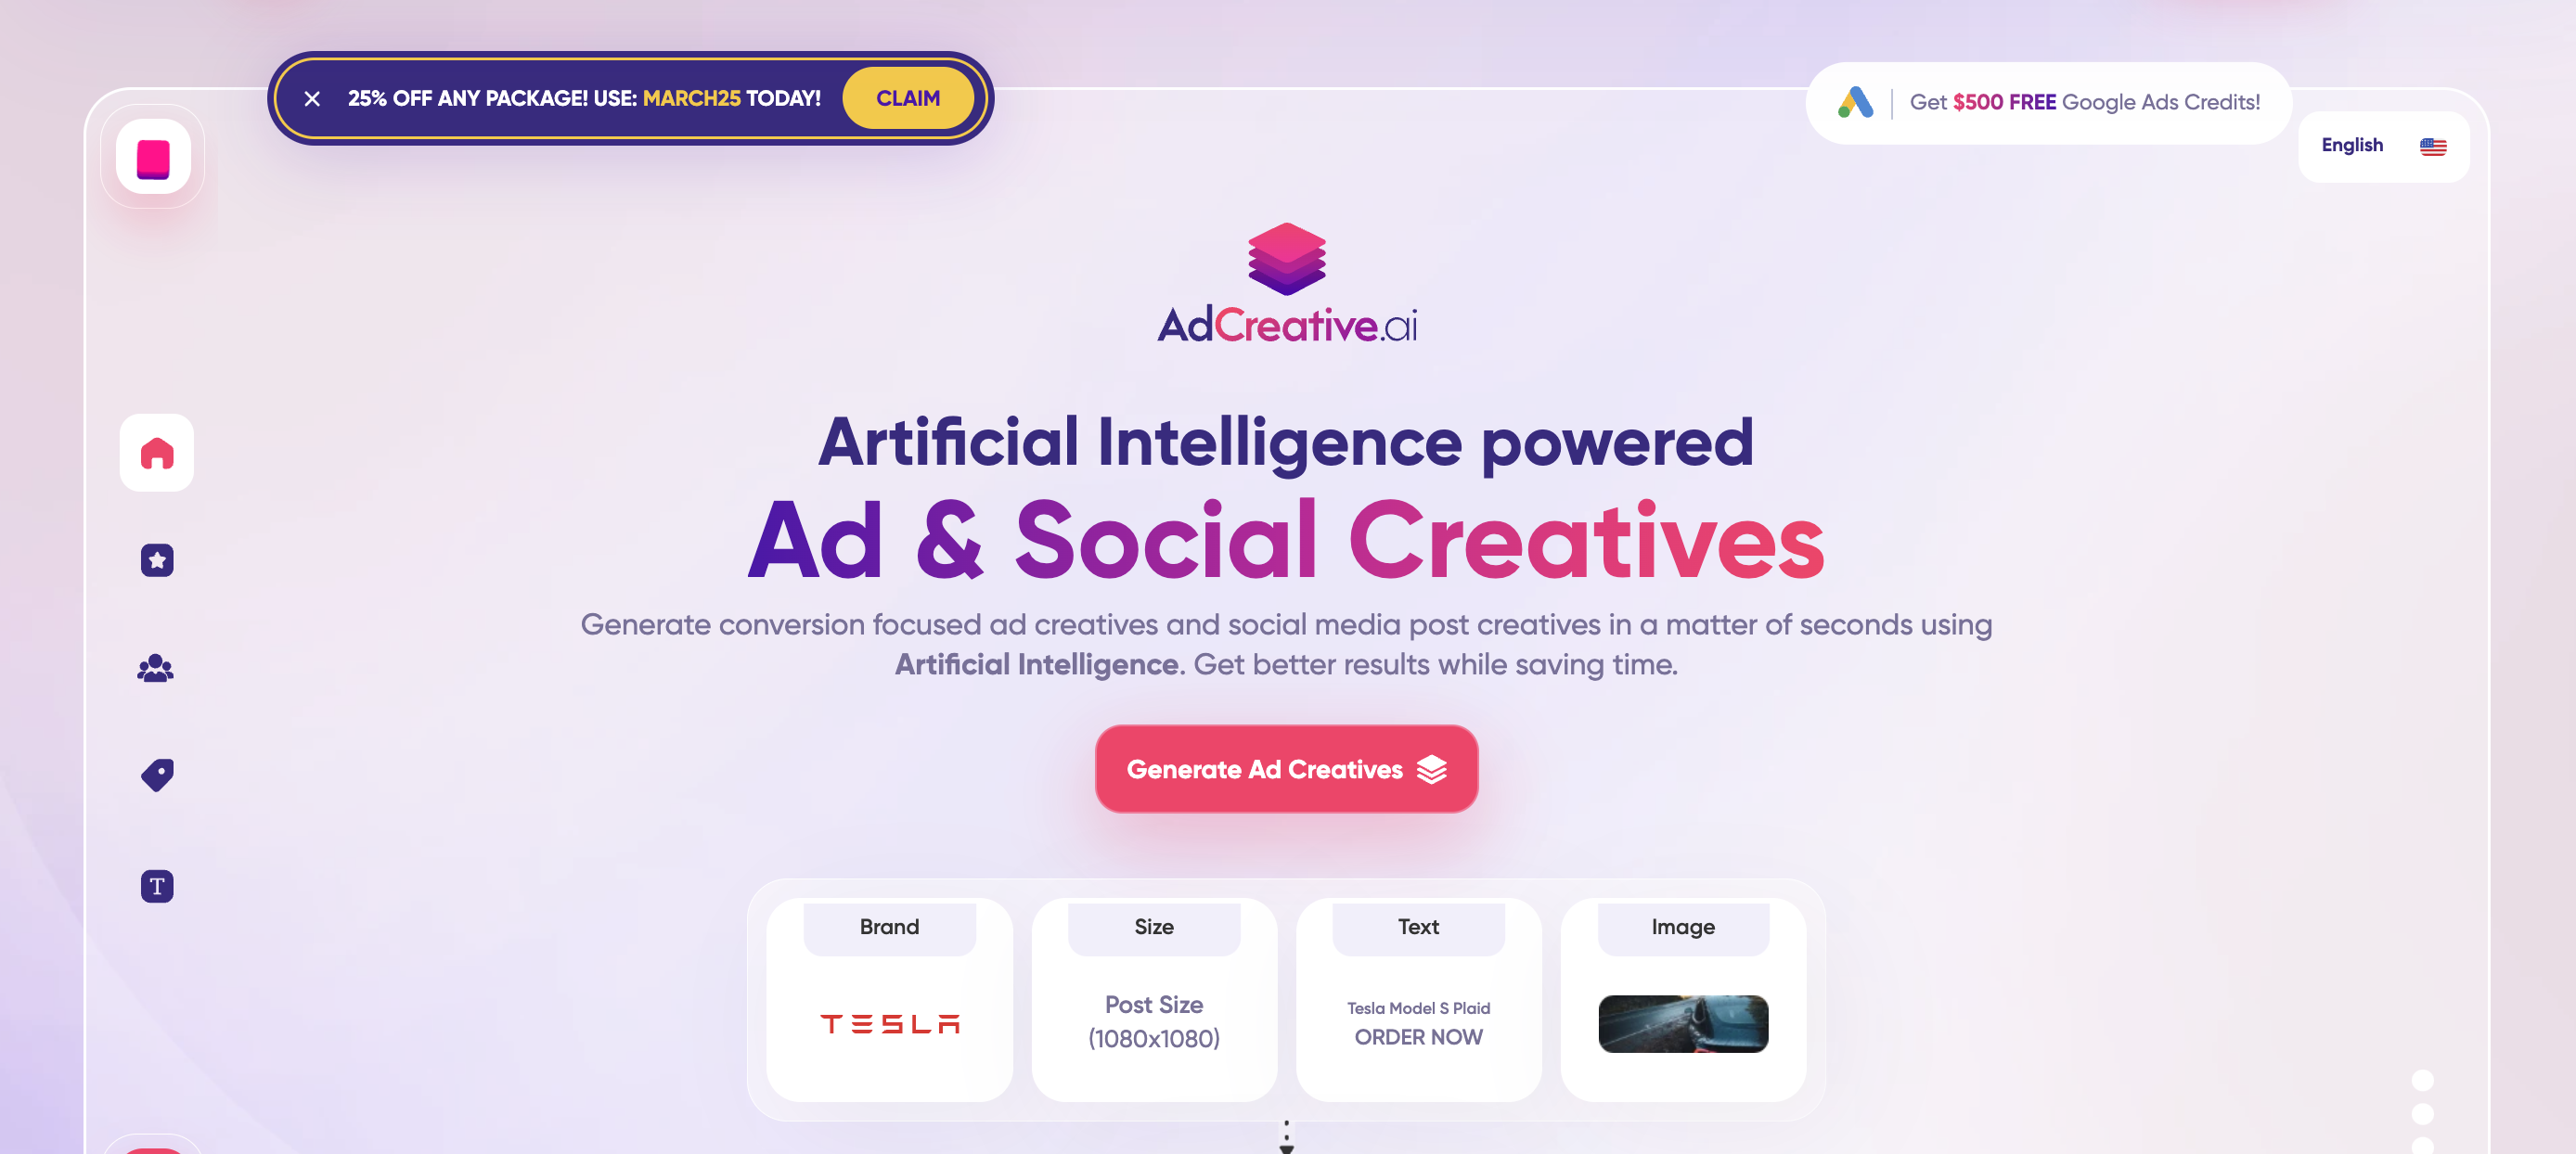 How AdCreative.ai can help your bussines?
